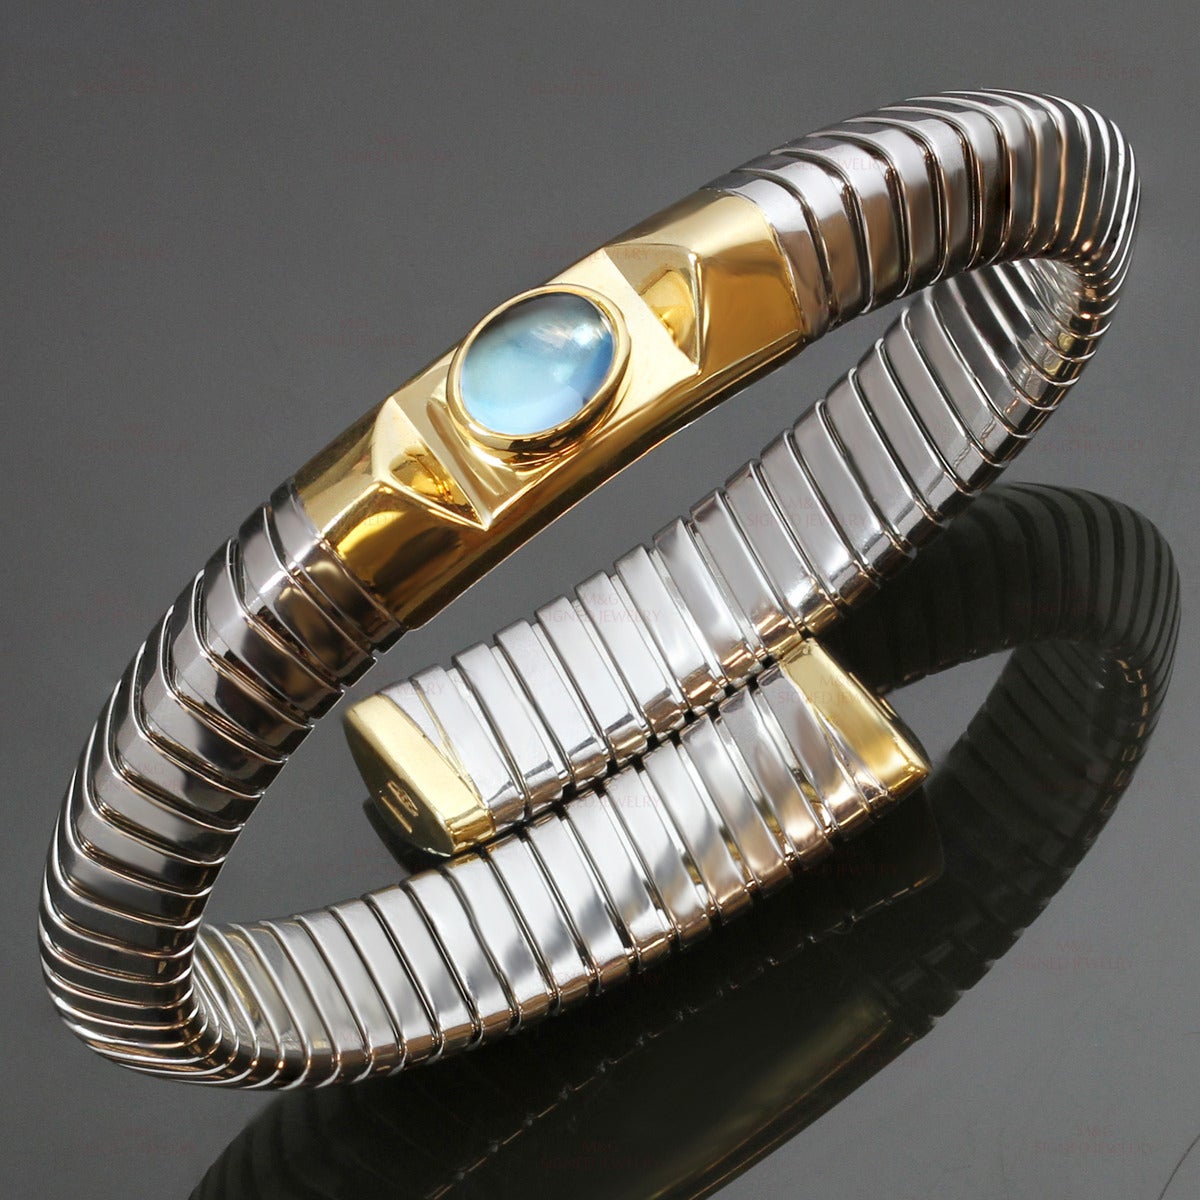 This iconic Bvlgari Tubogas bangle bracelet is made in stainless steel and features an oval cabochon blue topaz stone set in 18k yellow gold. Made in Italy circa 1990s. Measurements: 0.38